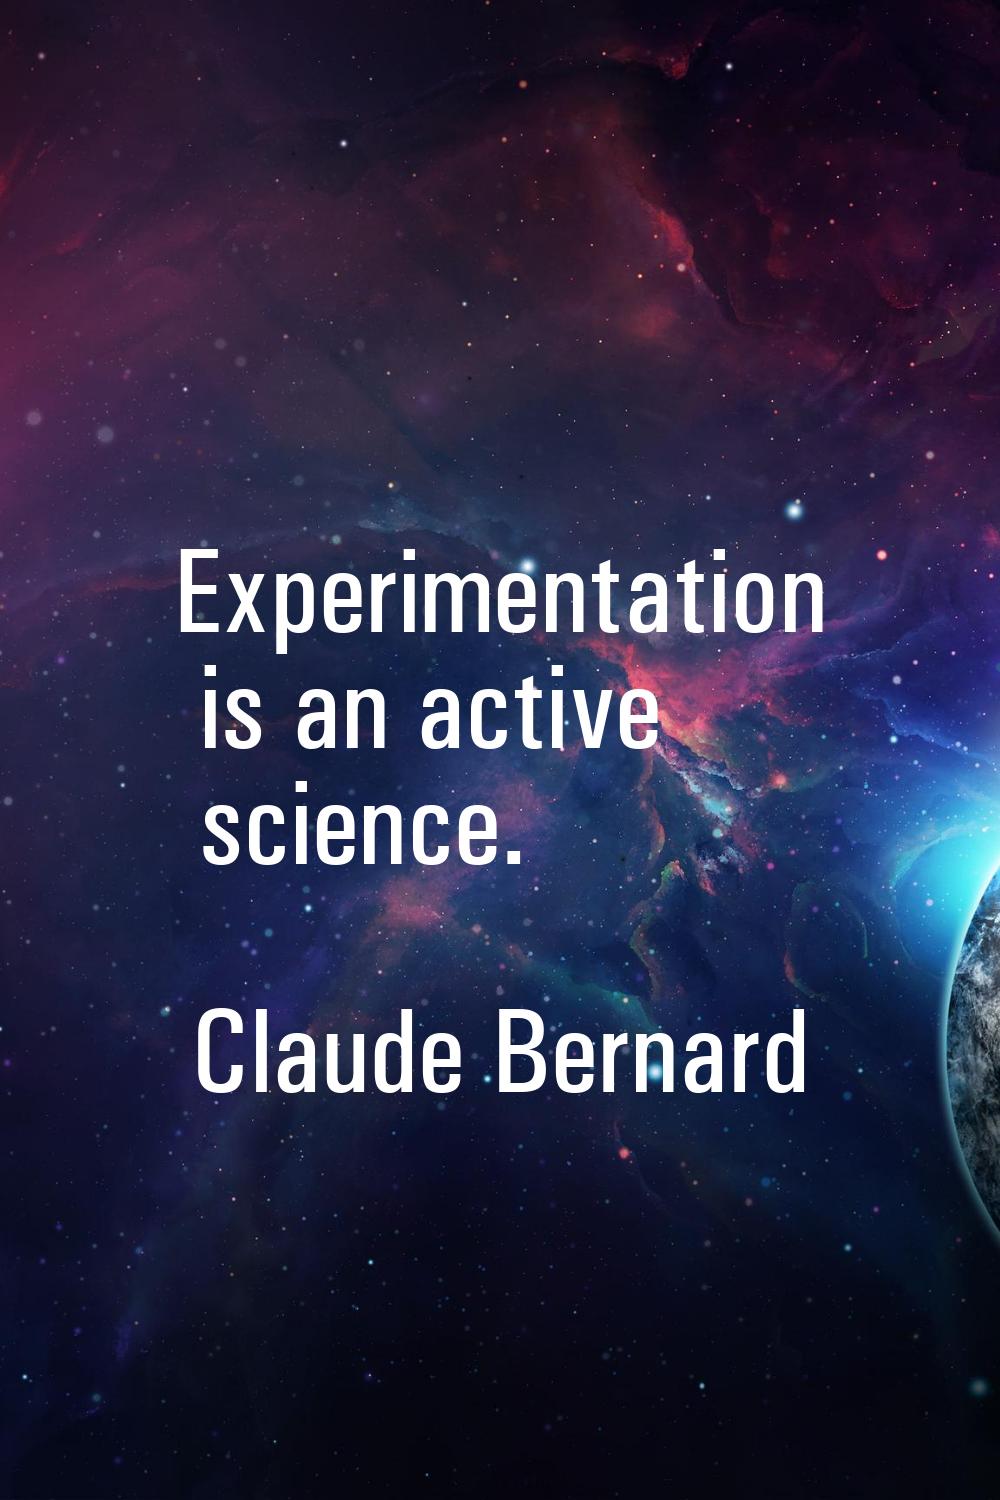 Experimentation is an active science.